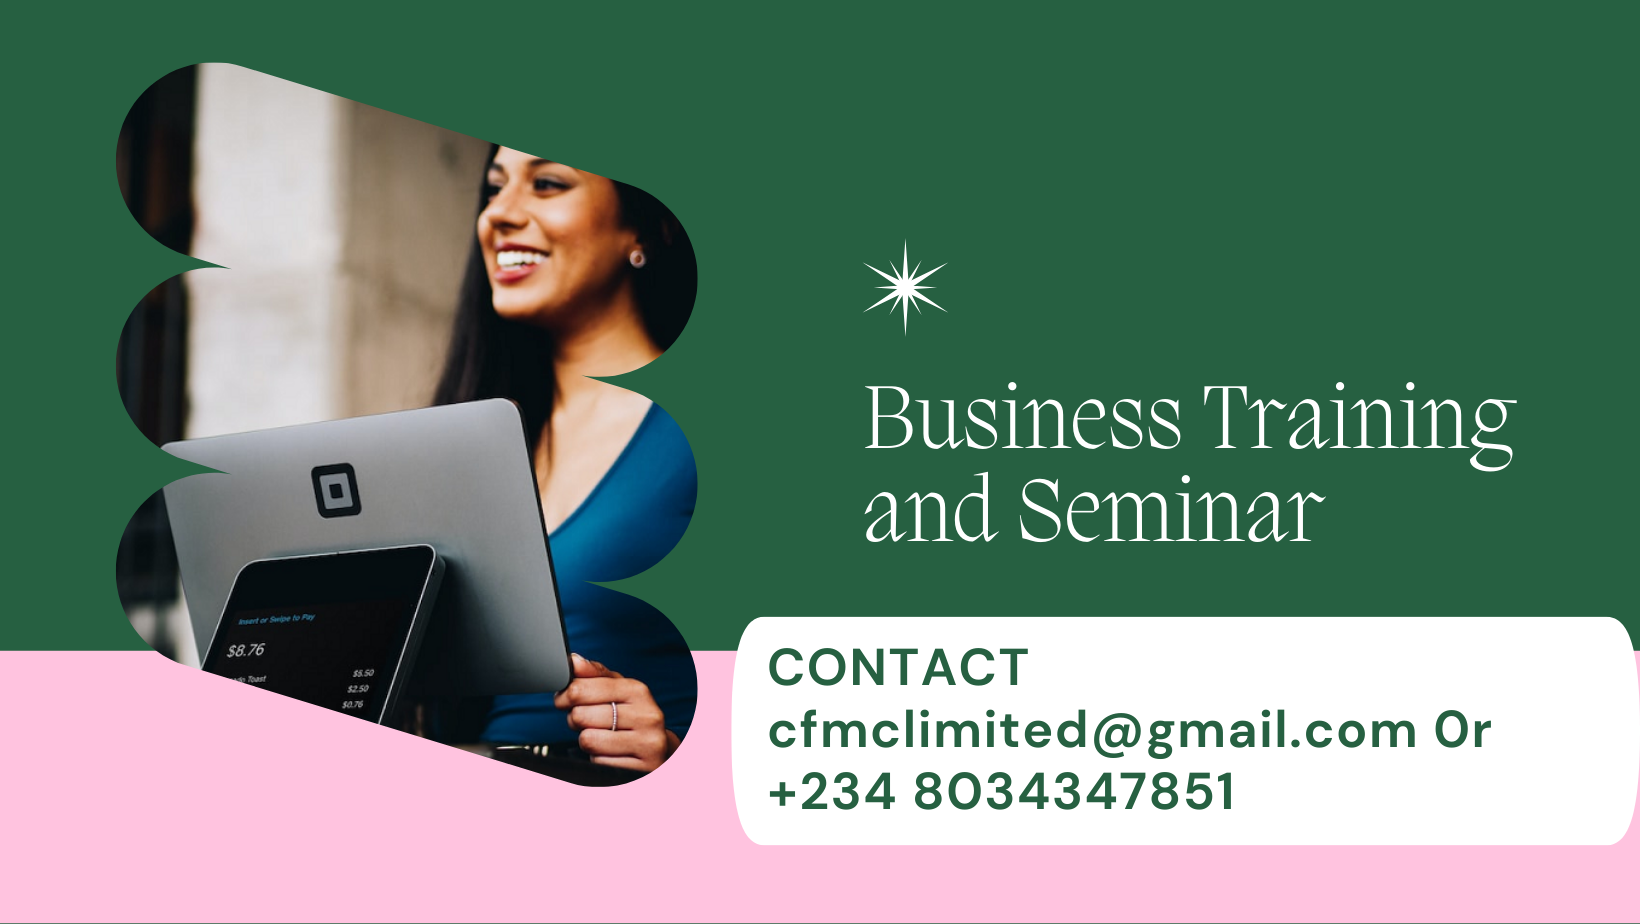 You are currently viewing Business Seminars and Training At Completefmc Ltd and How to Join